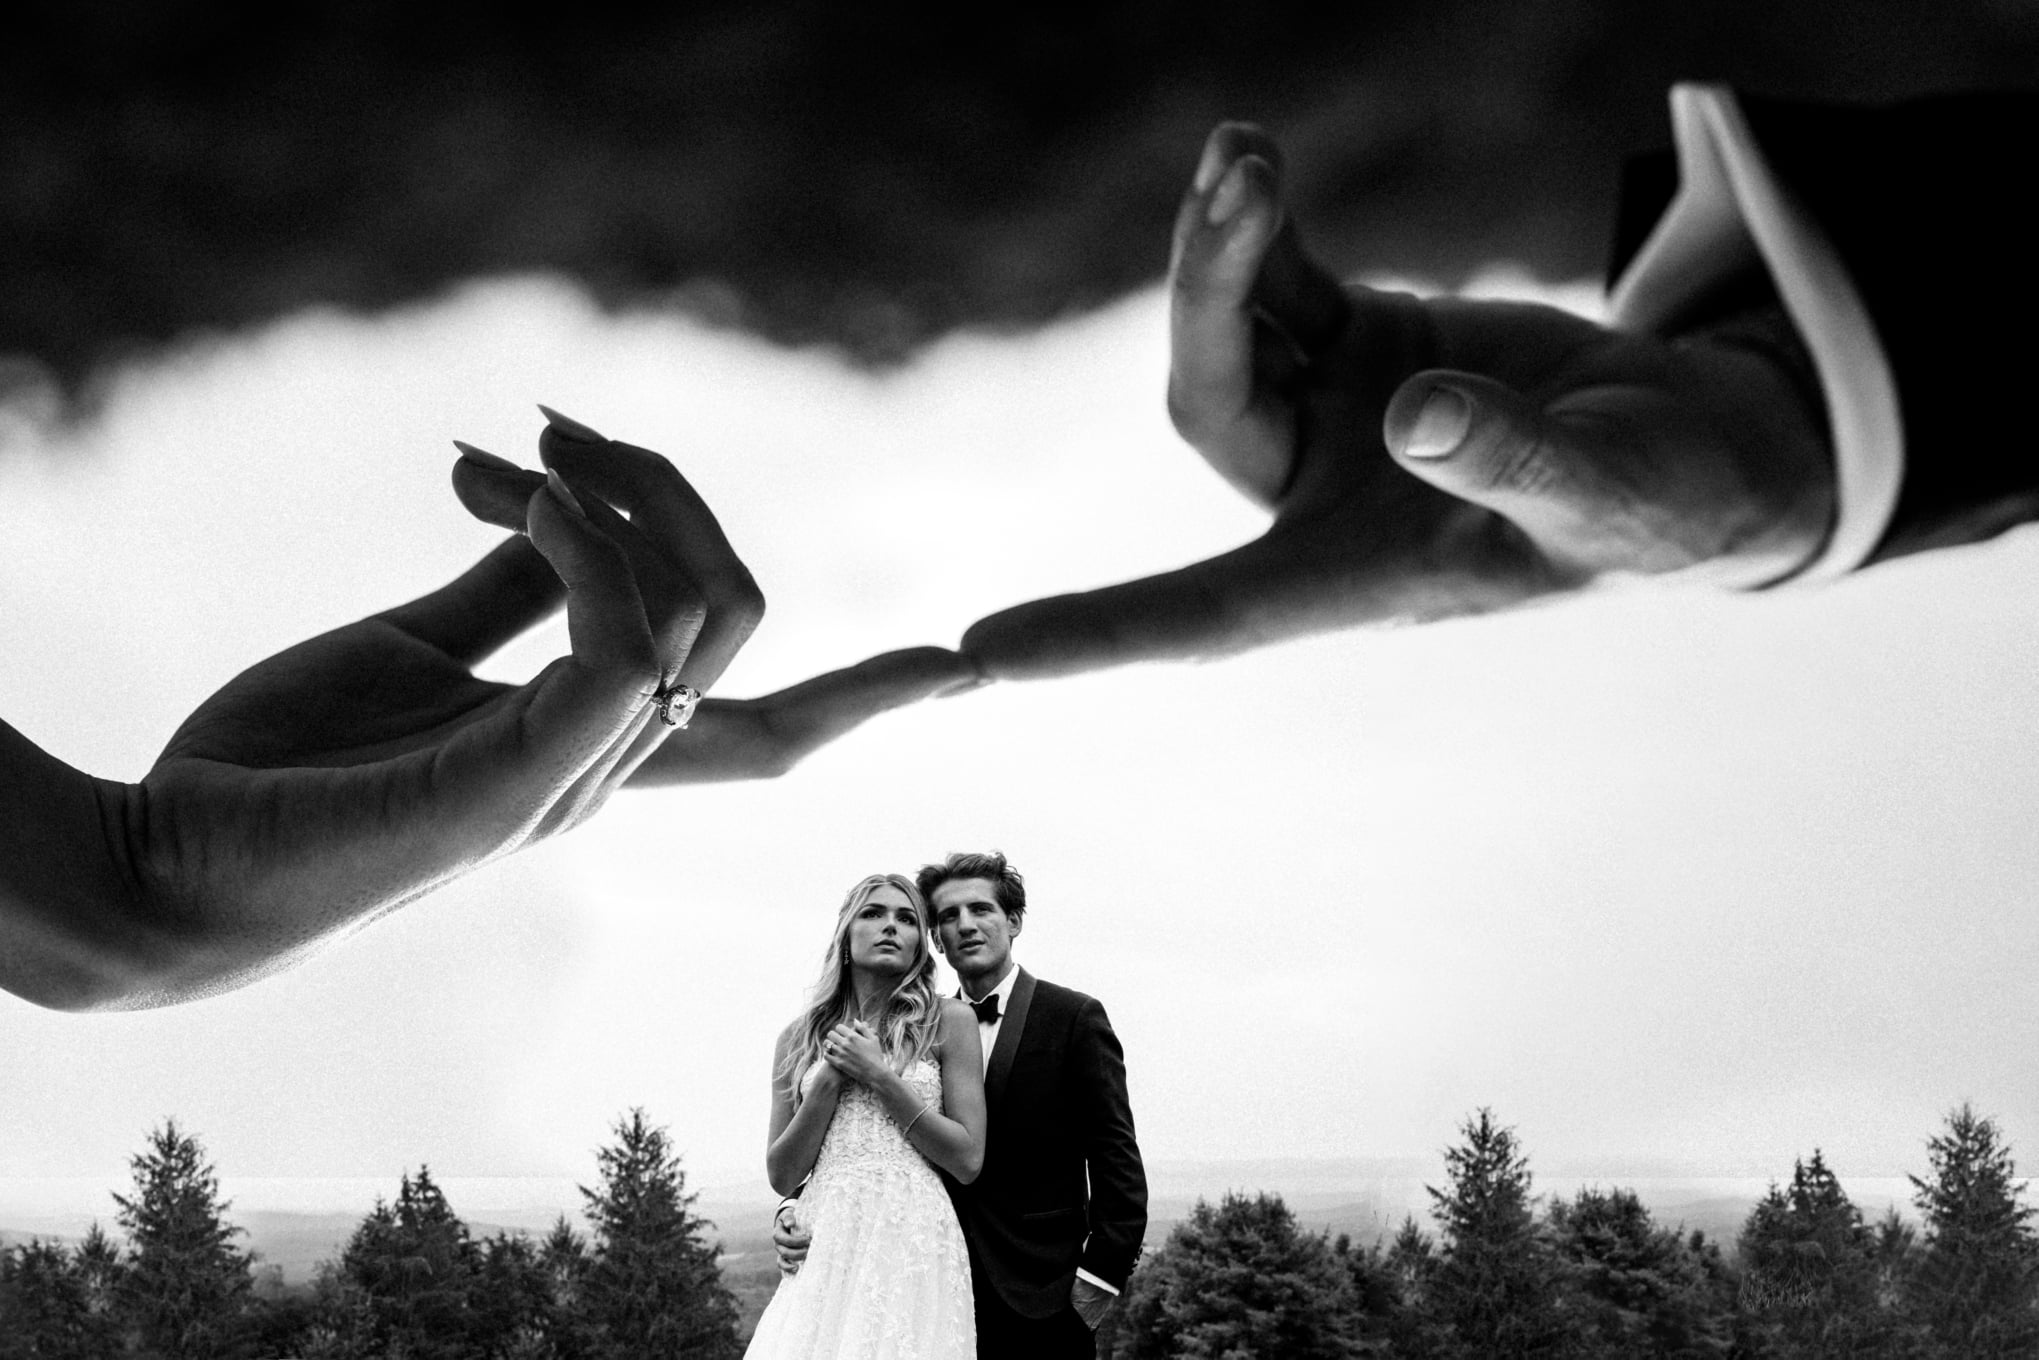 Double Exposure Image of Couple embracing in the background with their hands touching in the foreground